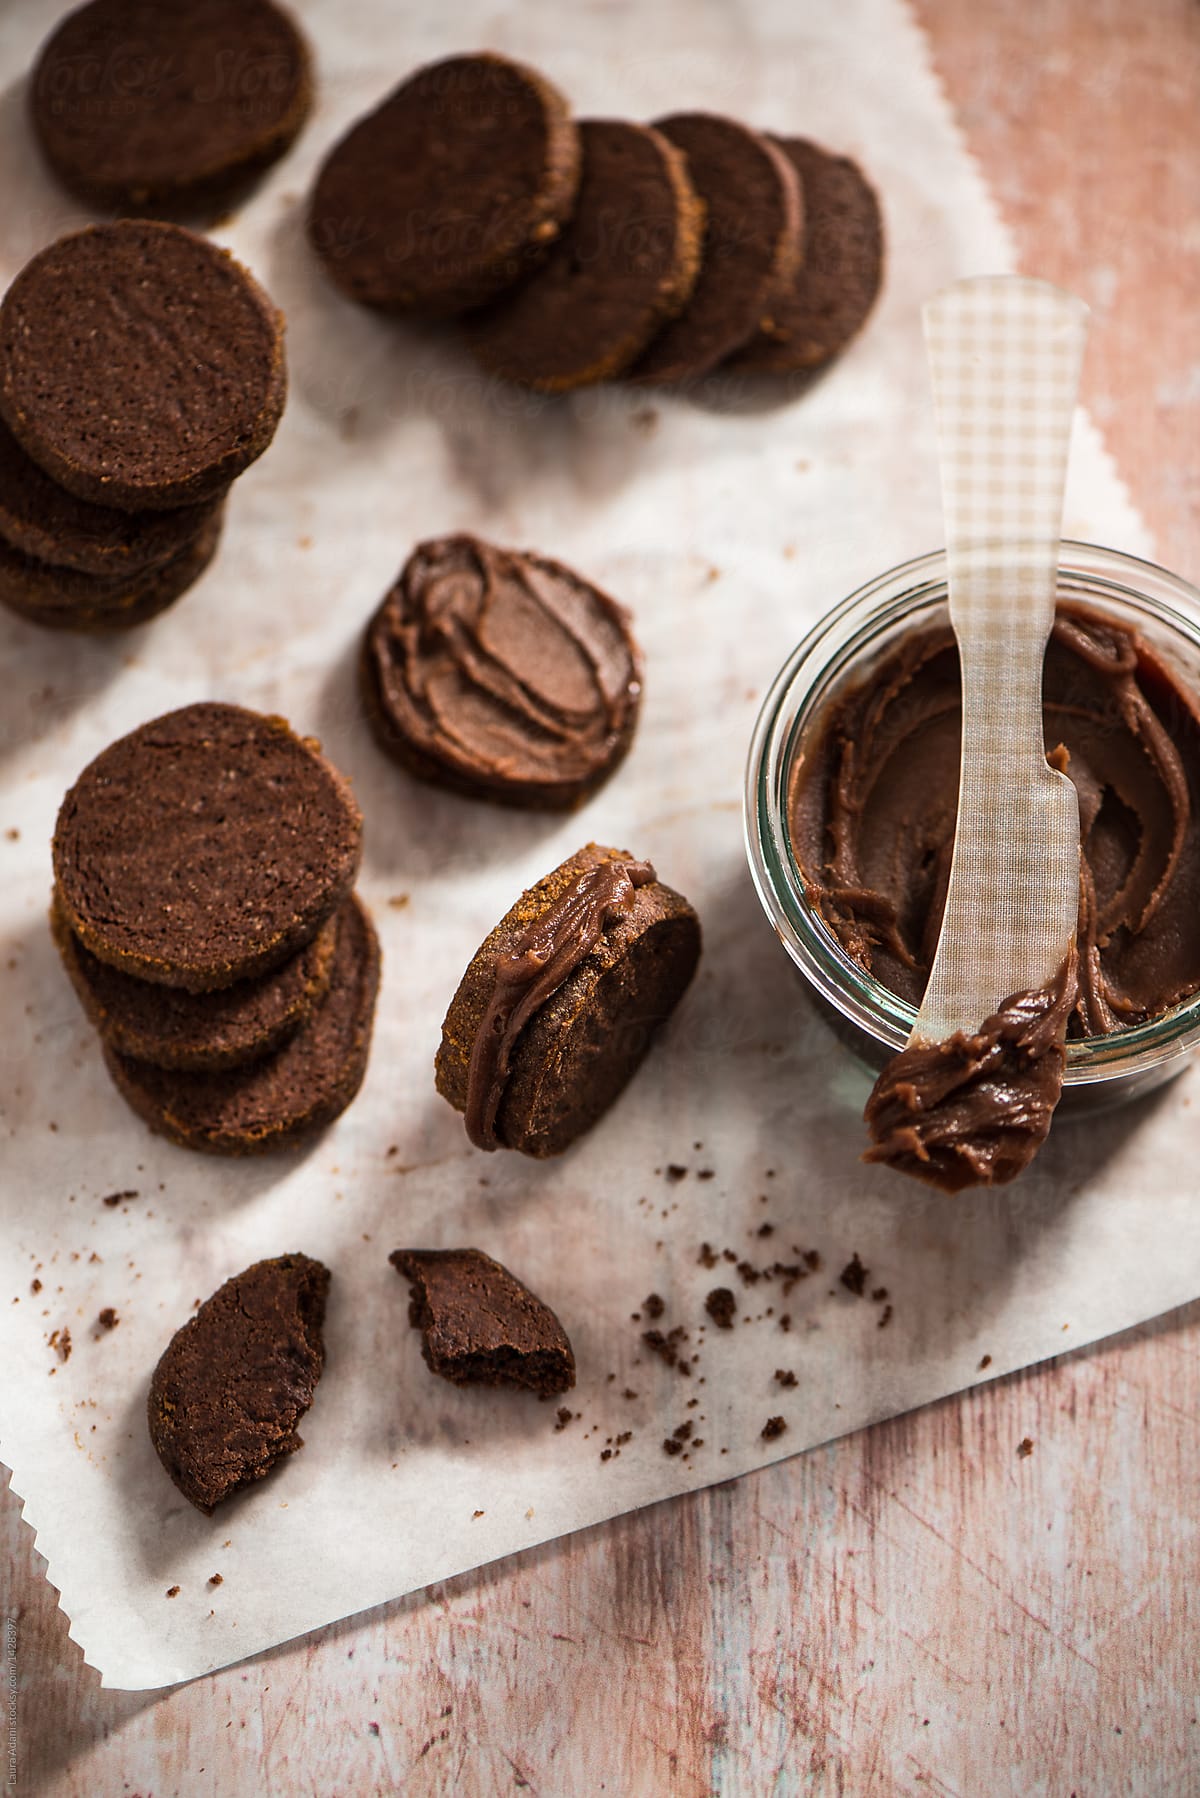 Cocoa cookies coated with chocolate salted caramel sauce